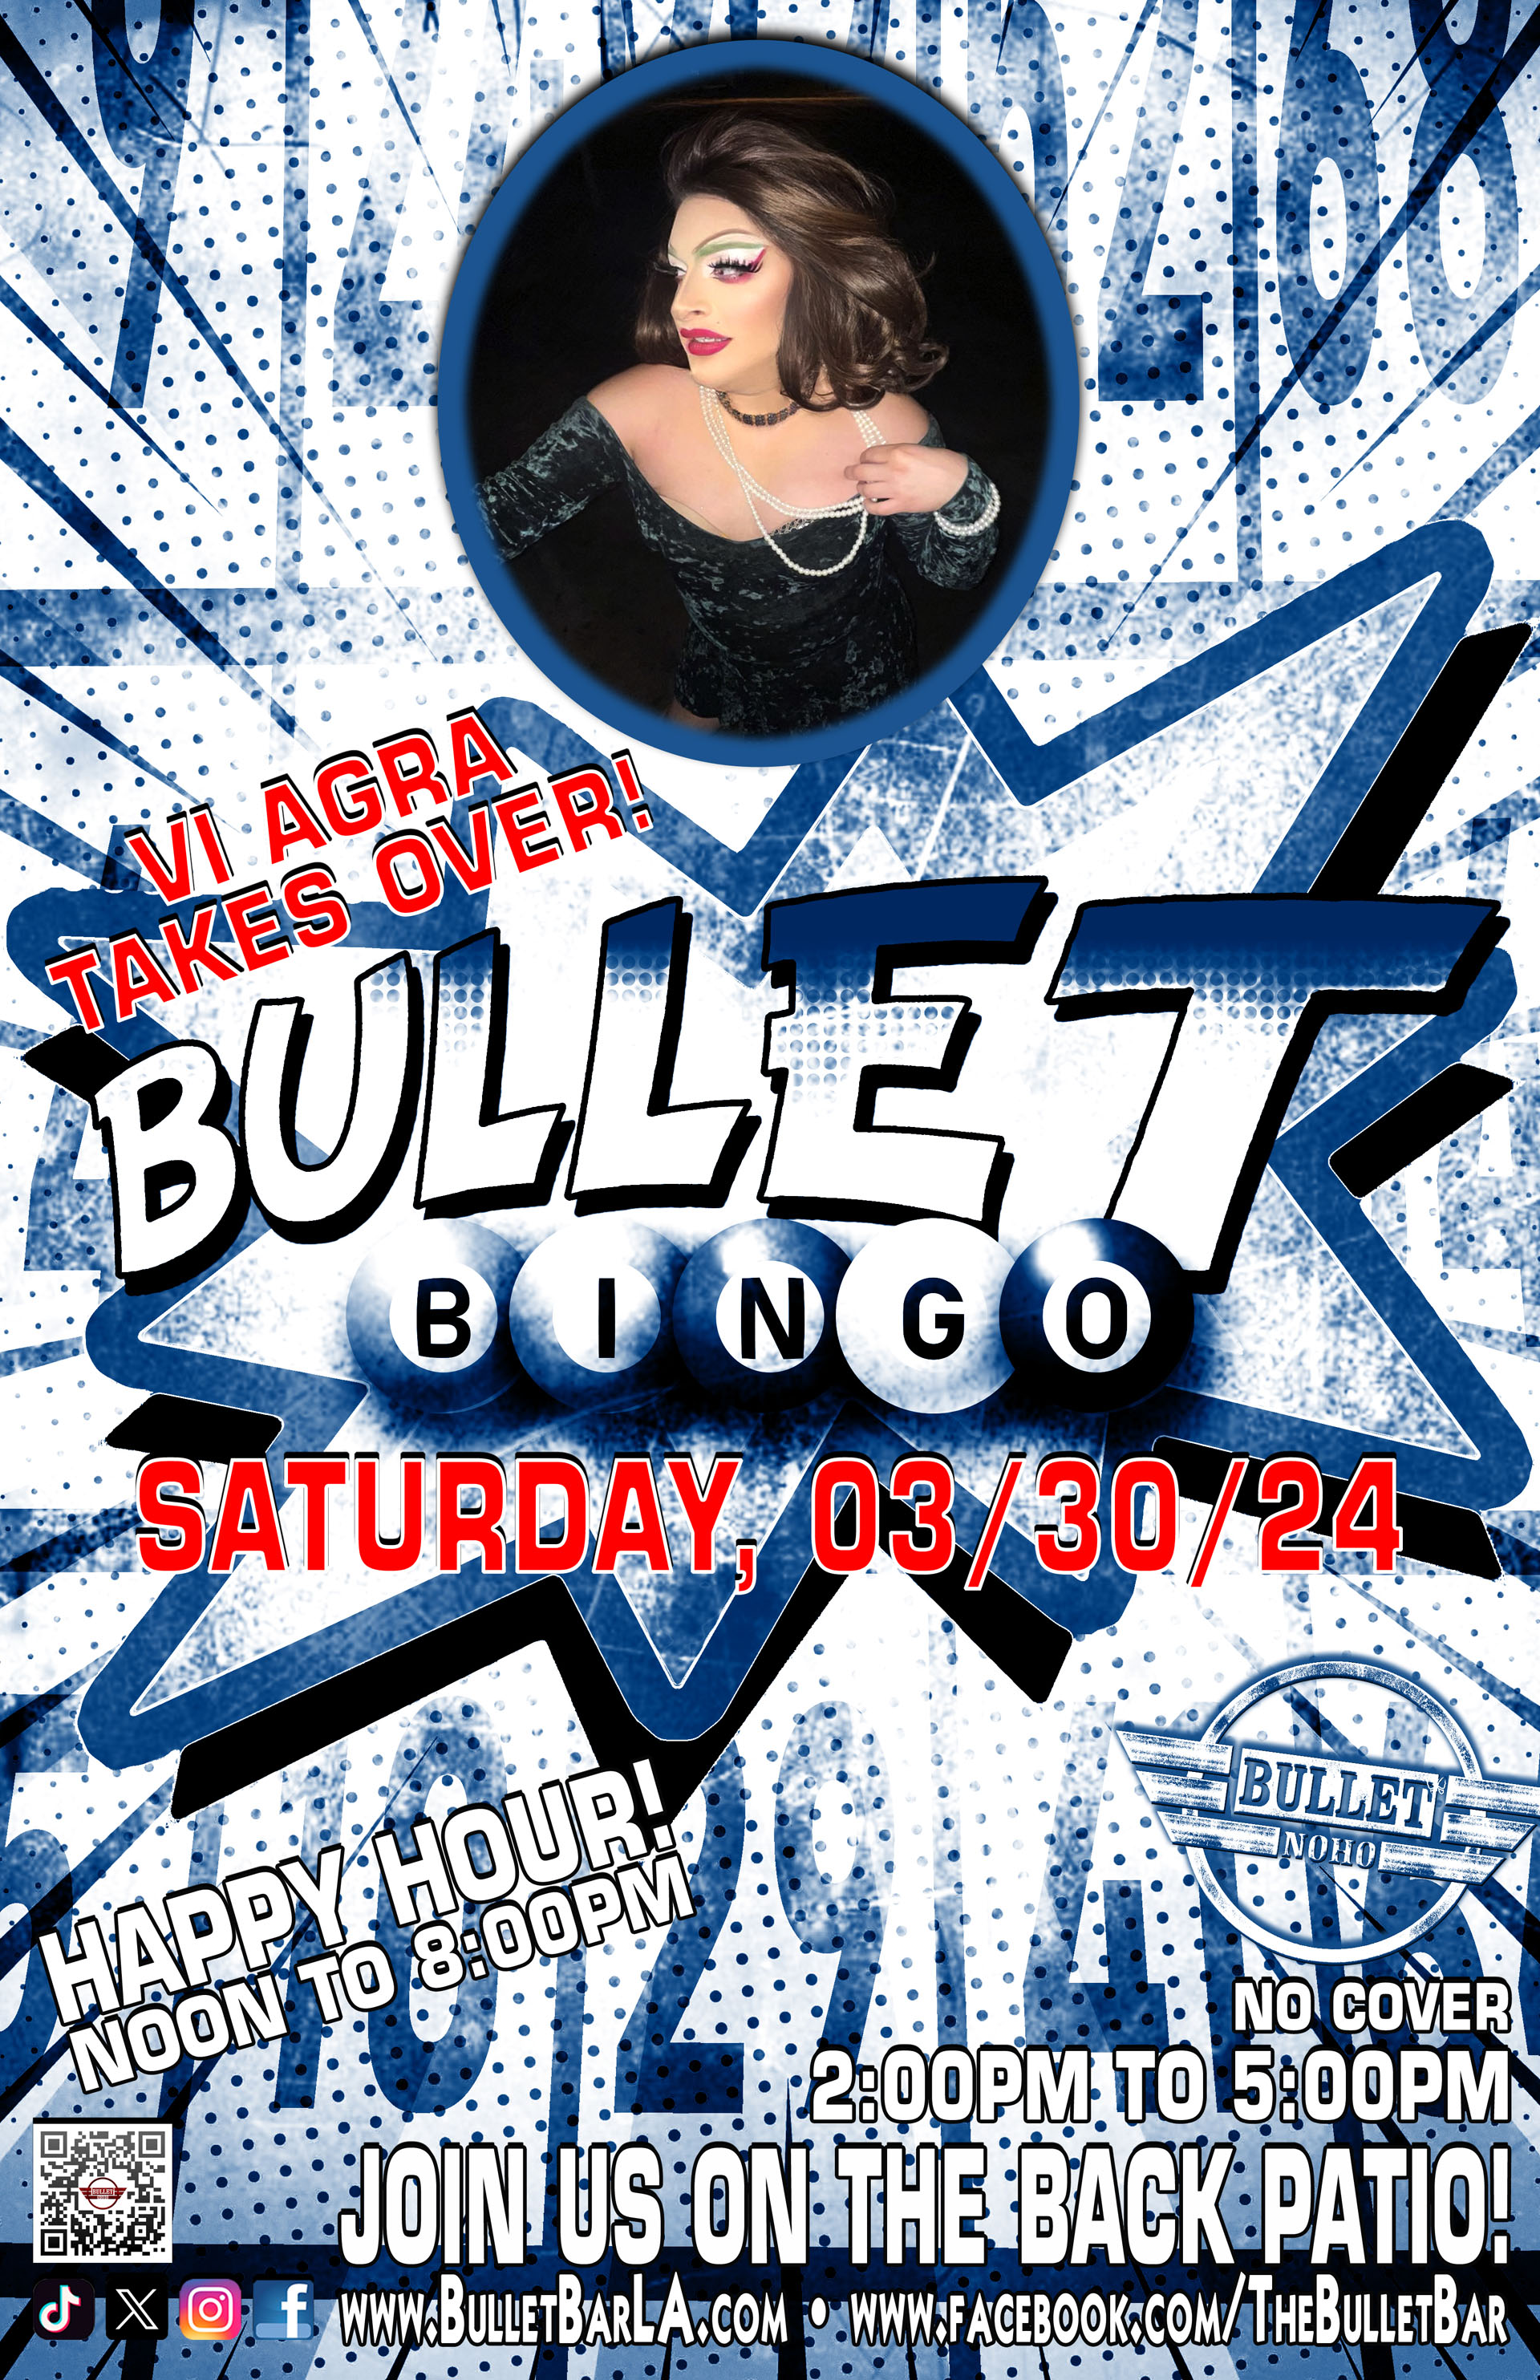 The Bullet Bar Presents BULLET BINGO Hosted by VI AGRA: Saturday, 03/30/24 at 2:00 PM on our back patio! No cover.